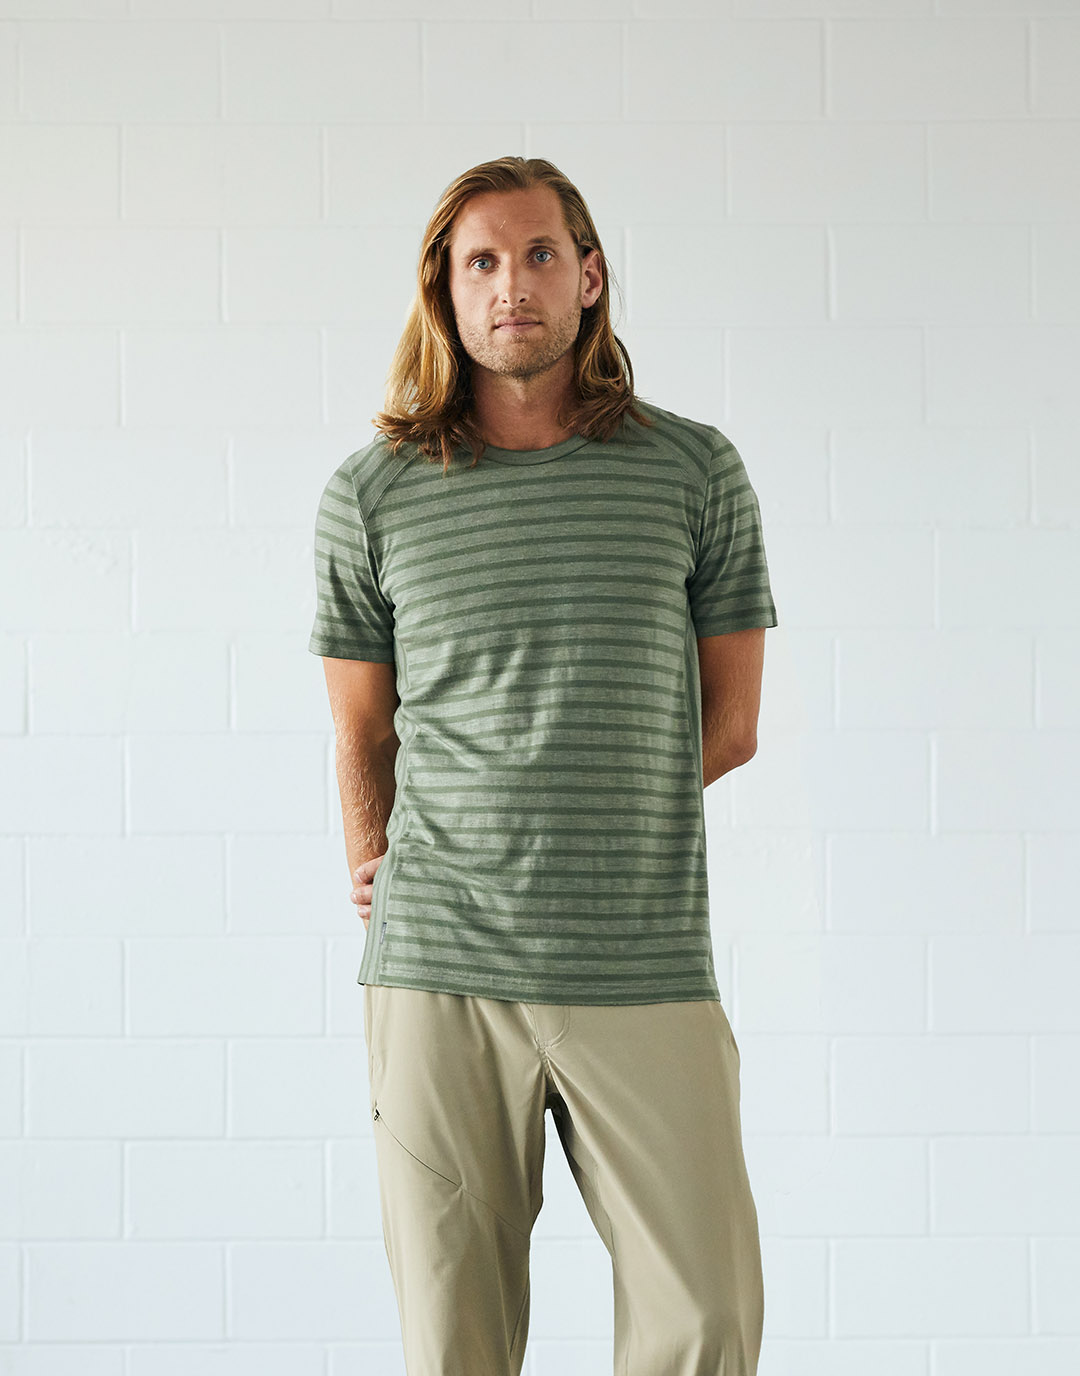 Man in green striped t-shirt and khaki pants.